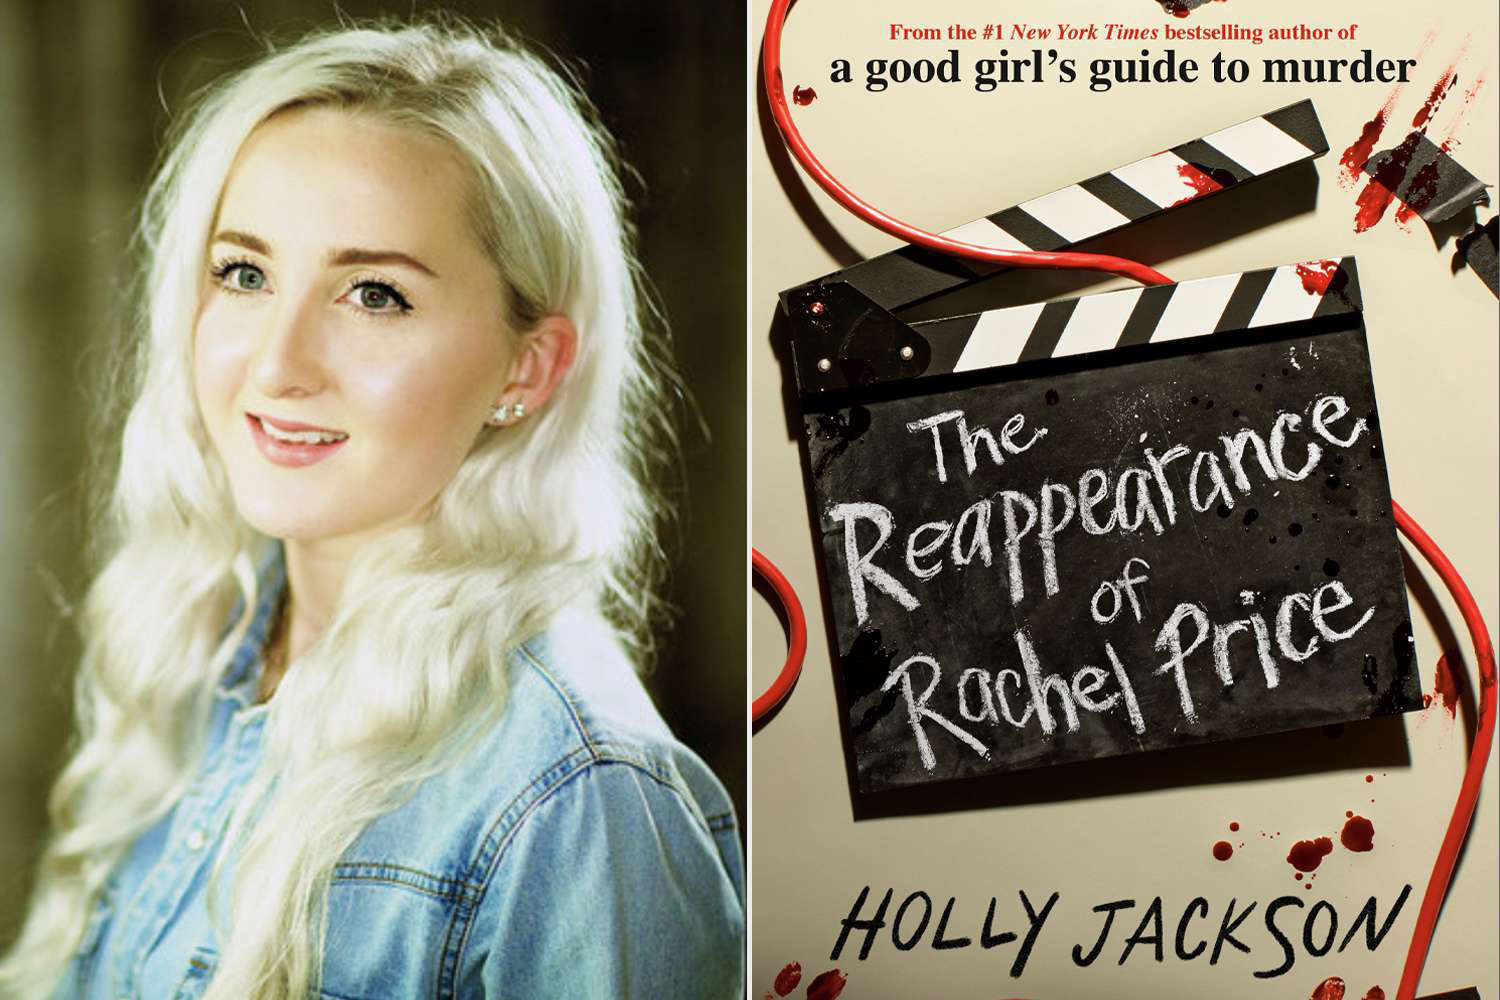 ‘a Good Girls Guide To Murder Author Holly Jackson Announces New True Crime Fueled Novel 